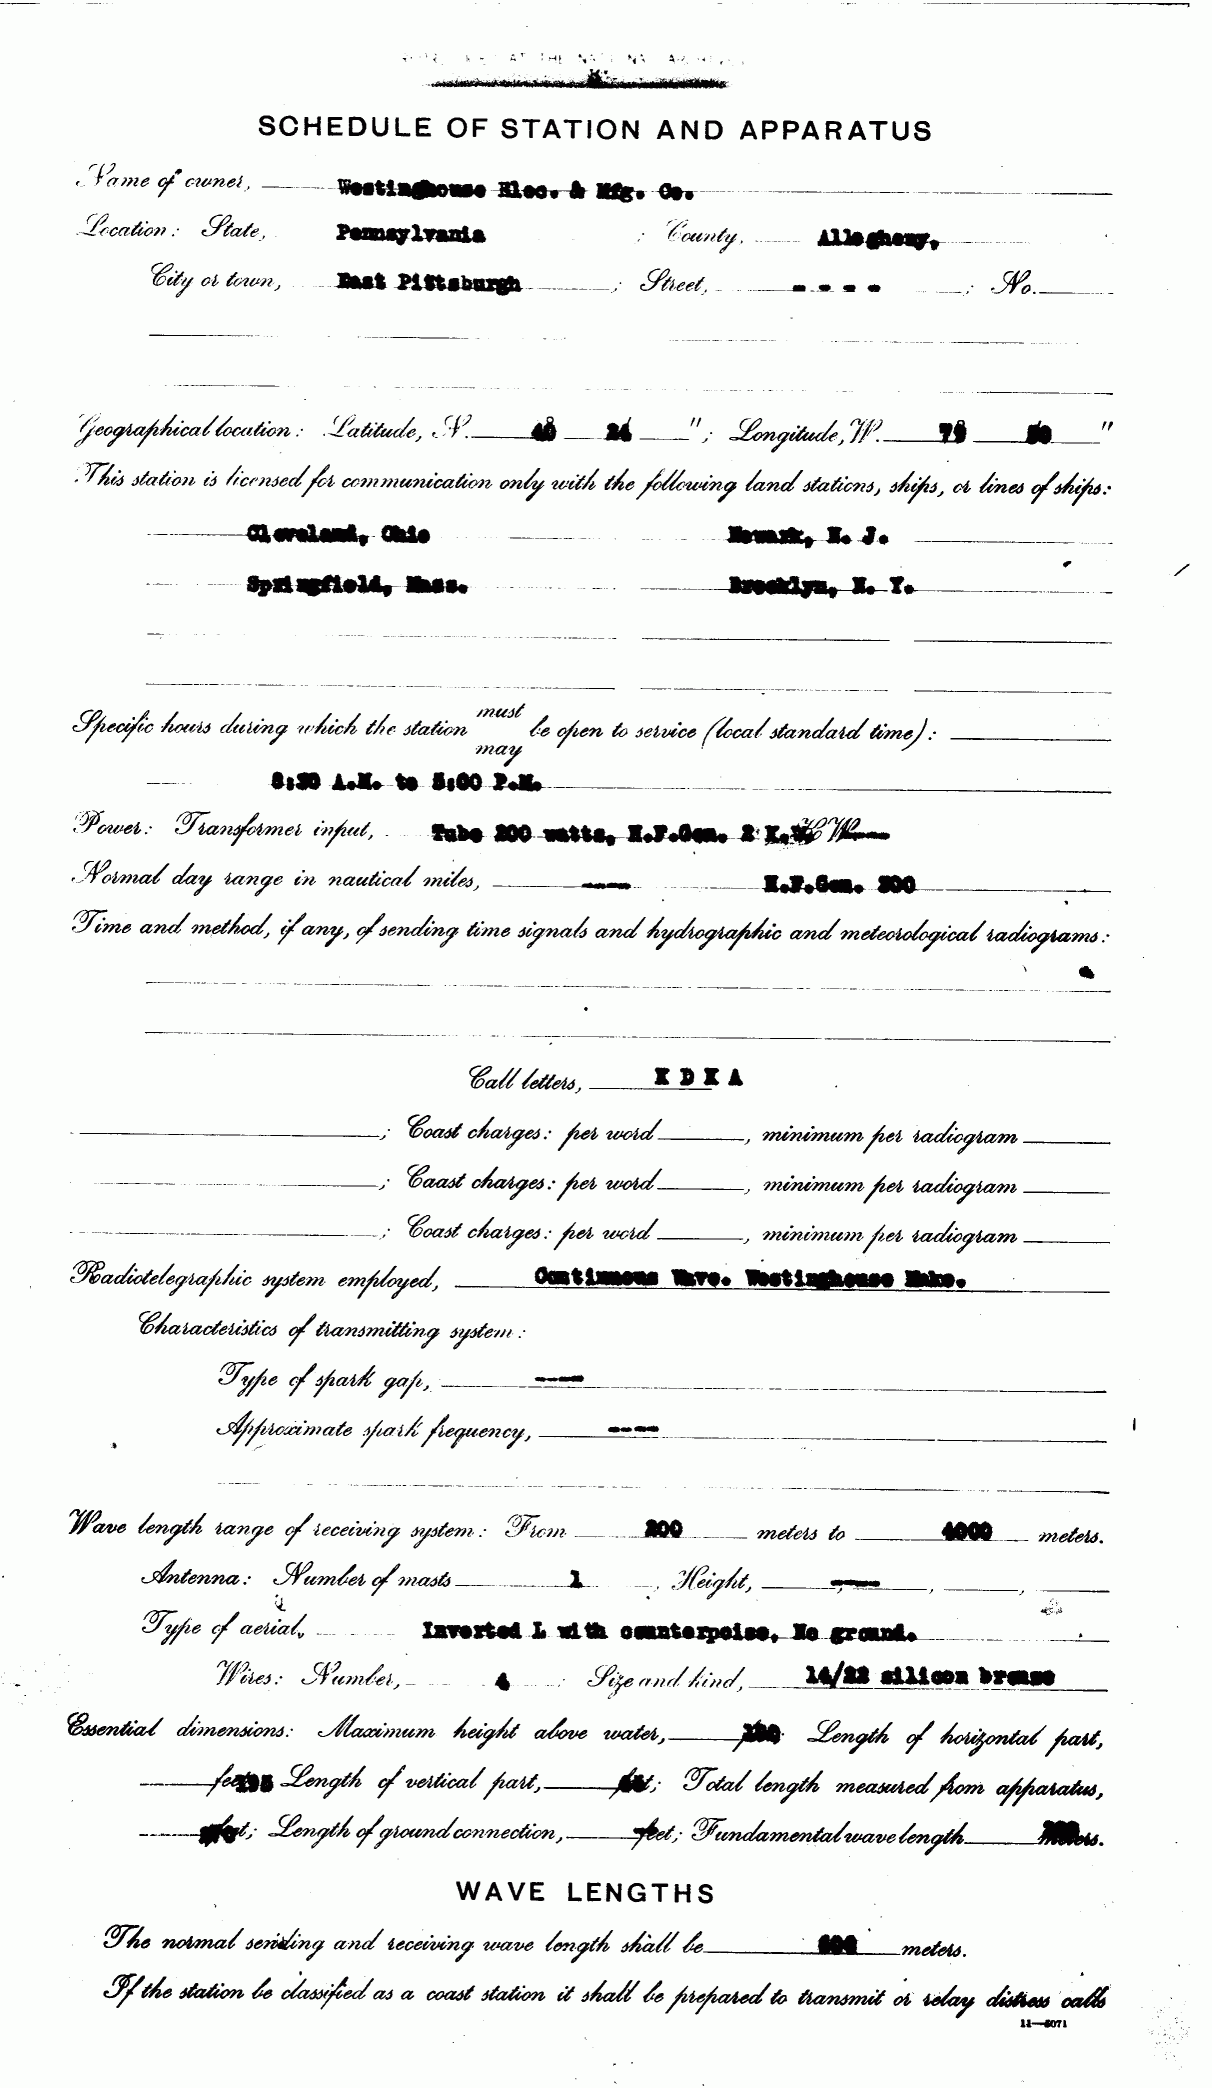 KDKA first licence (October 27, 1920) - 3rd page